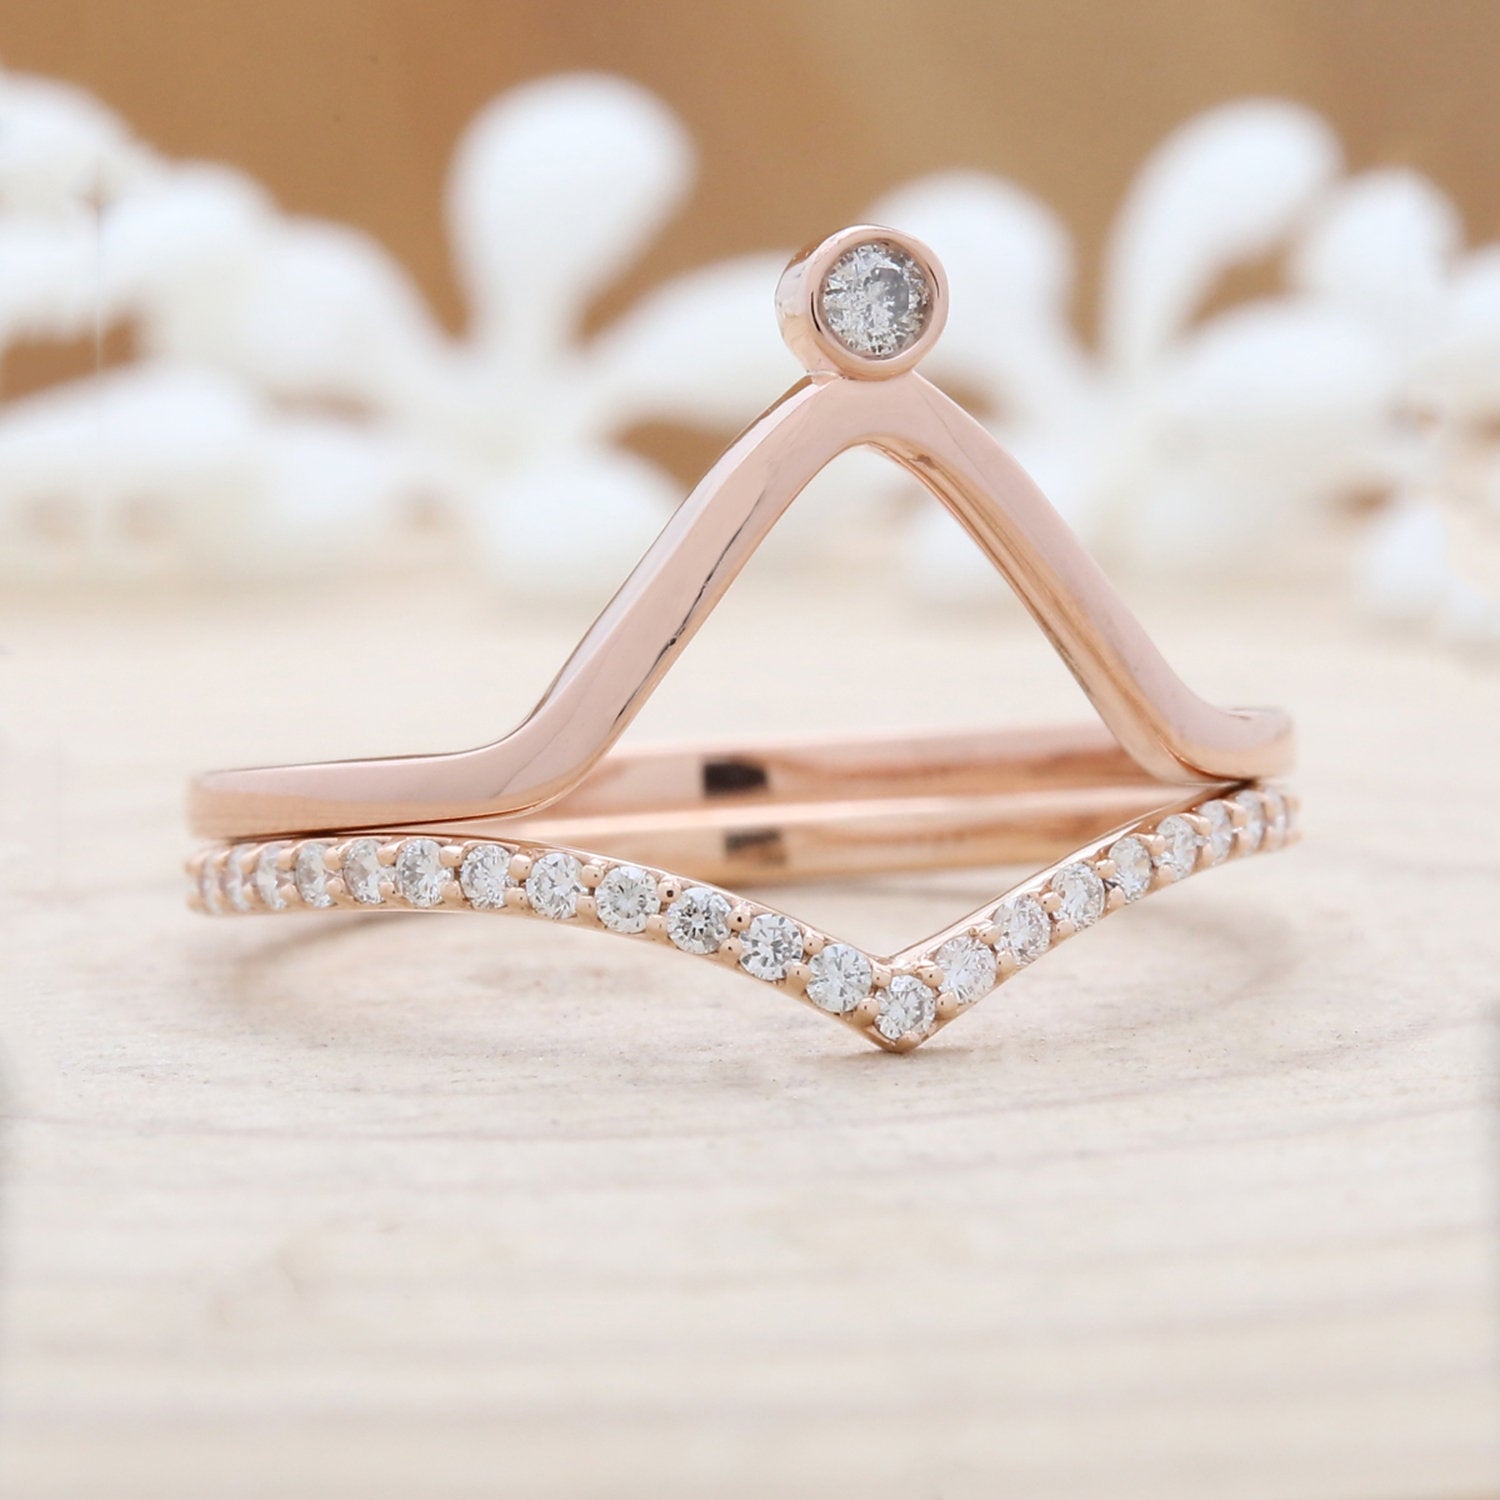 Salt And Pepper Round Diamond 14K Rose Gold Ring Band Engagement Wedding Gift Band Ring KD620